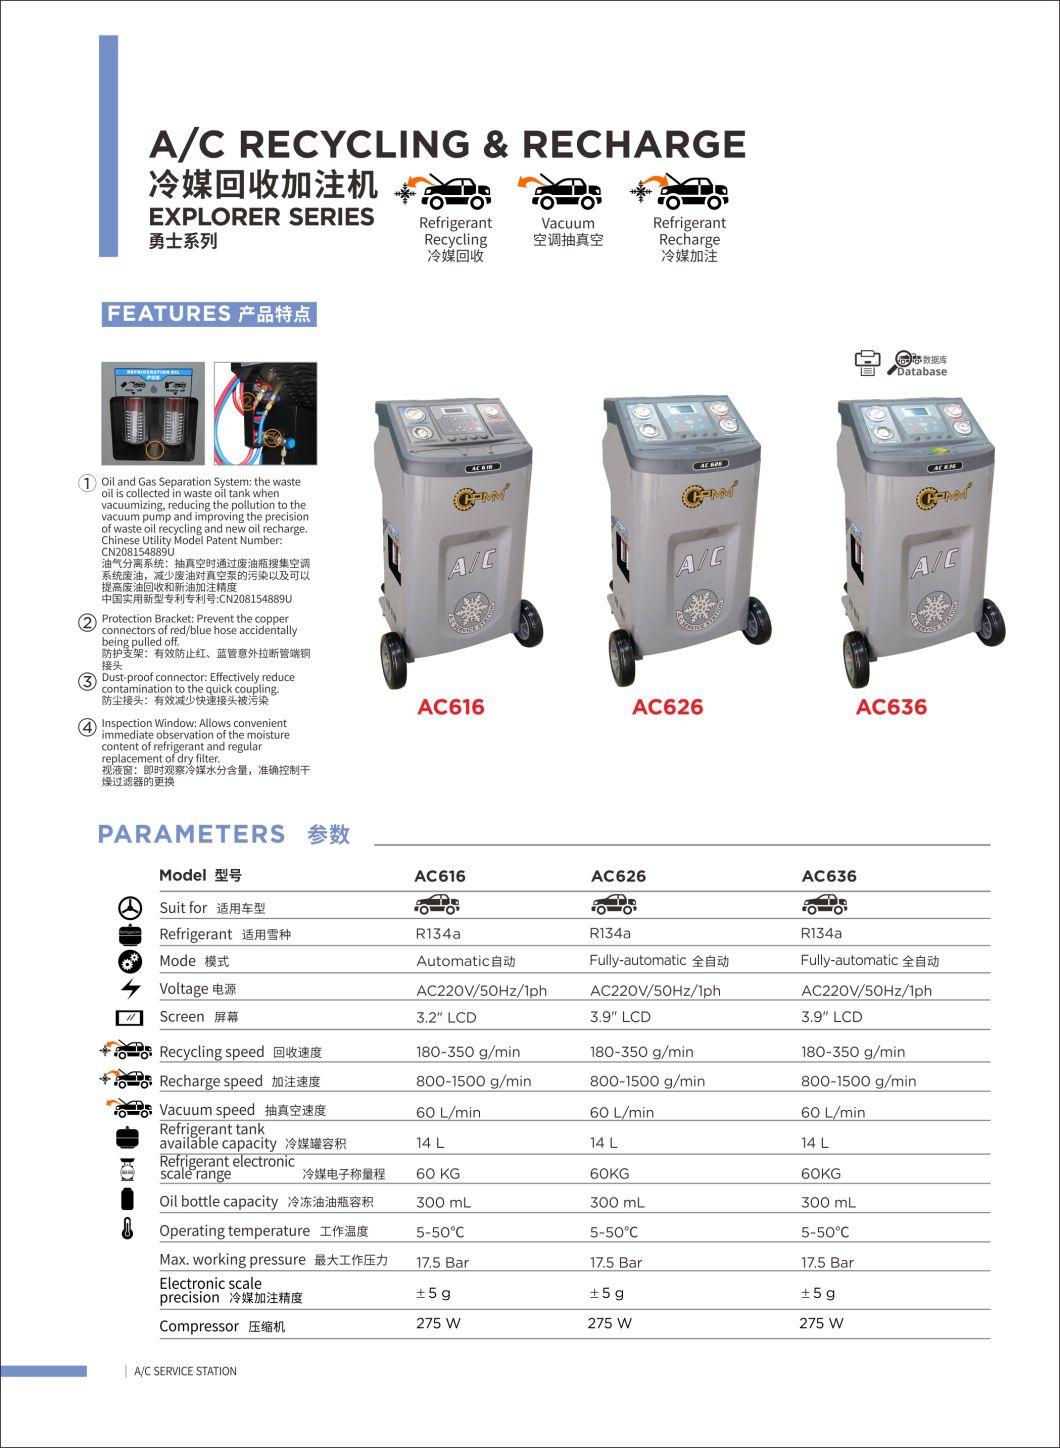 A/C Recovery Machine AC616 A/C Recycling & Recharger R-134A Refrigerant Recovery, Recycling and Recharging Machine for Hybrid and Non-Hybrid Vehicles